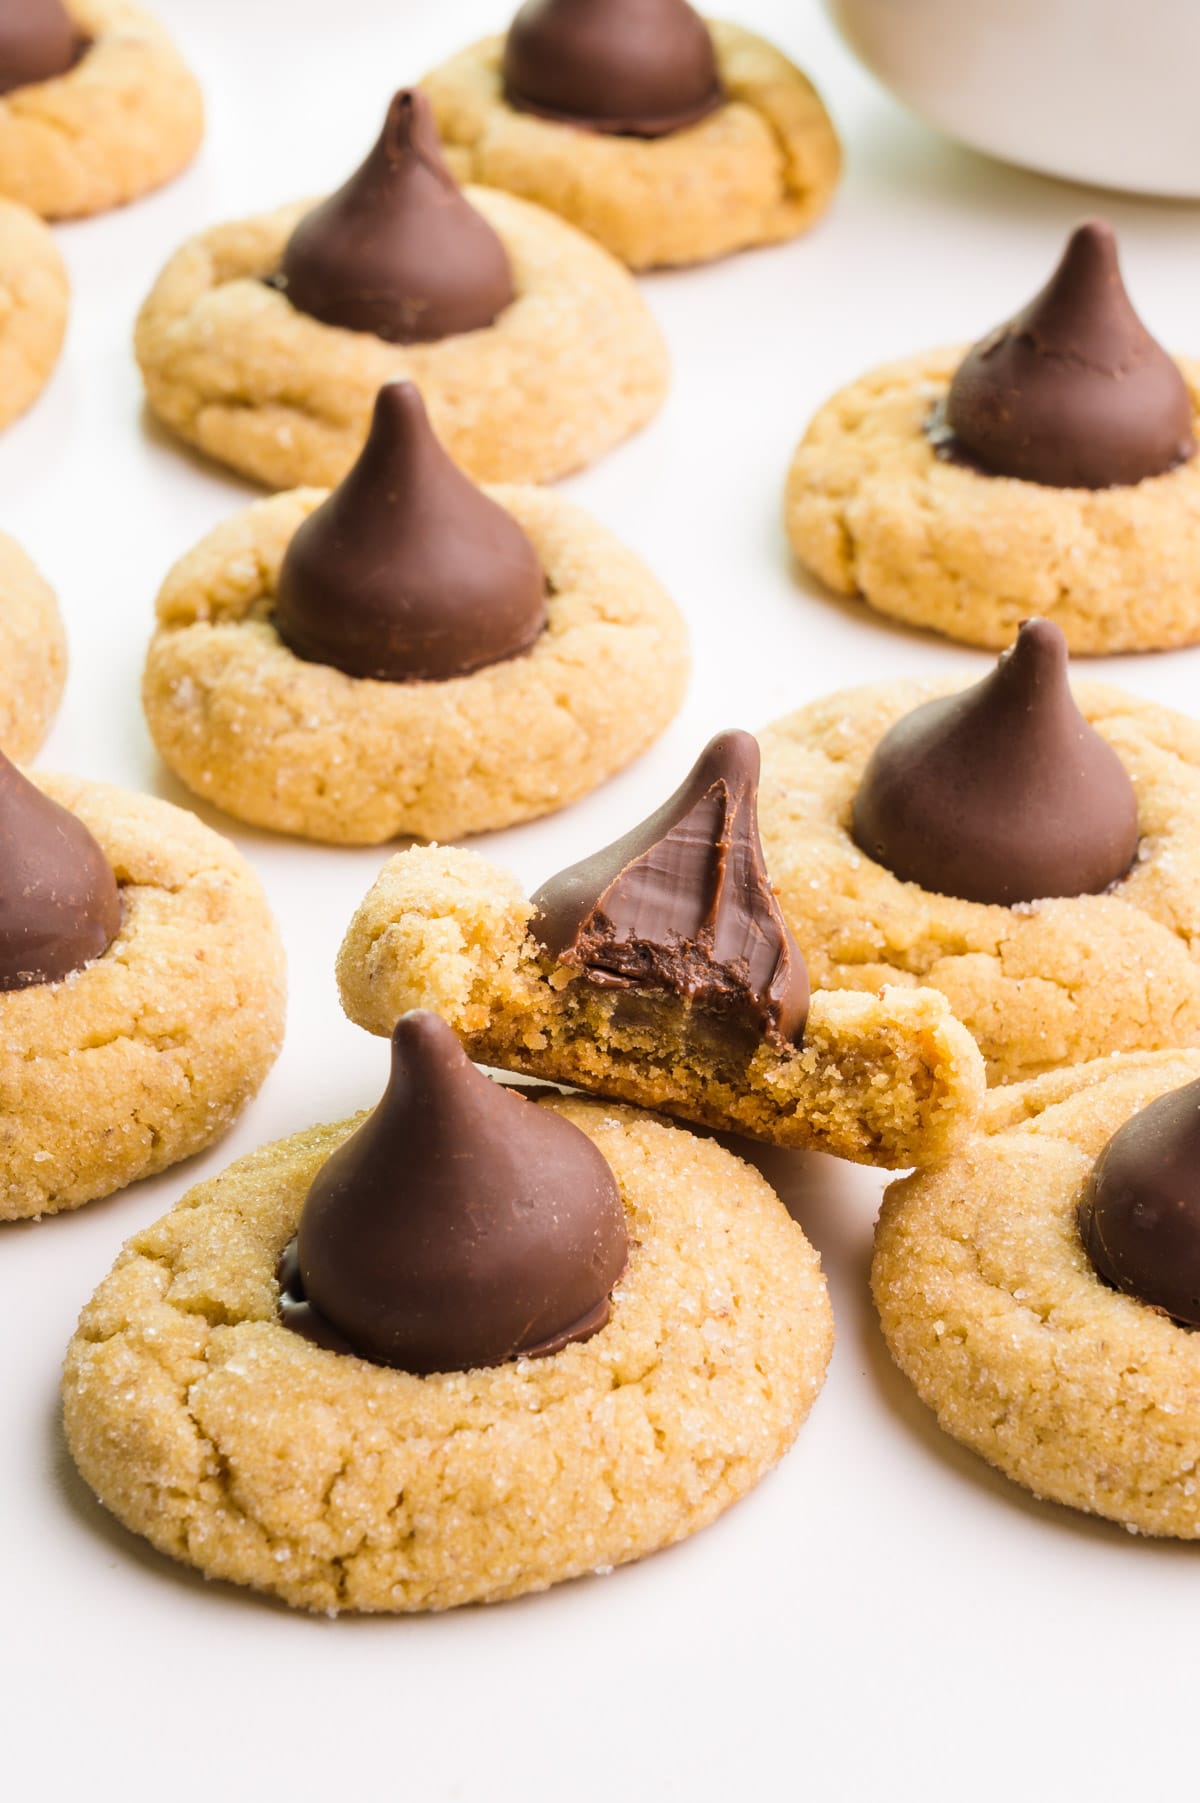 Several vegan peanut butter blossoms cookies sit on a white table. One has a bite taken out.